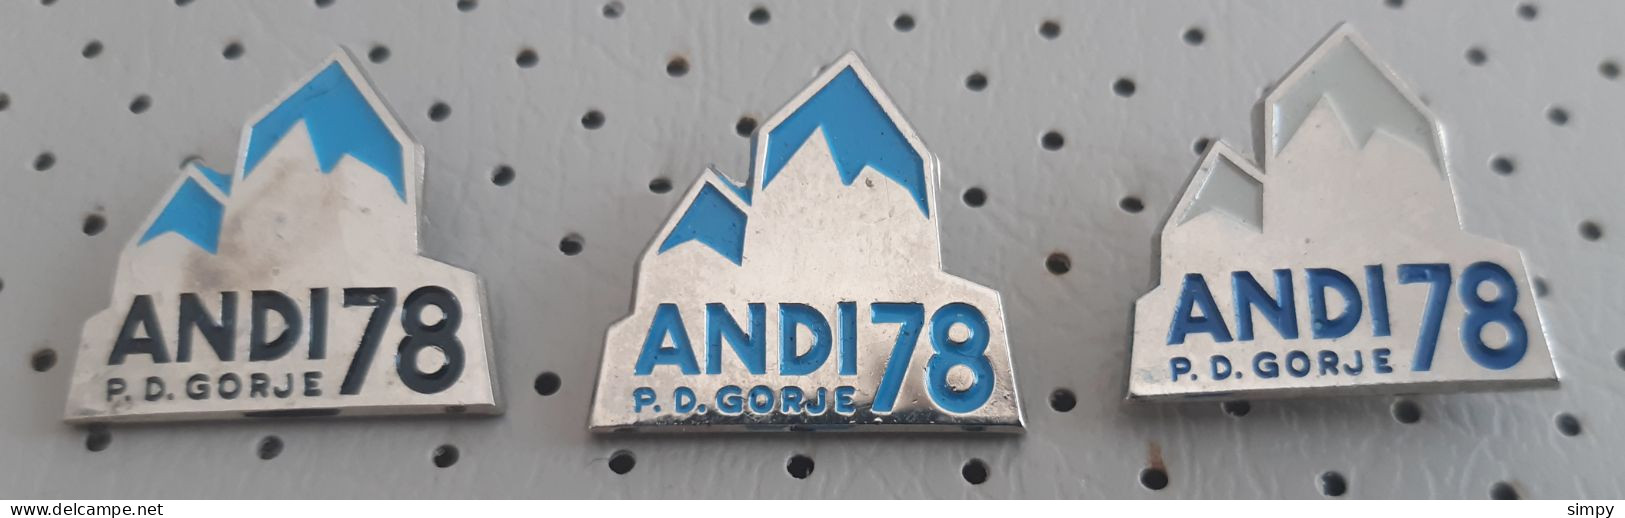 Yugoslav Expedition ANDES 1978 PD Gorje Slovenia Alpinism Mountaineering Pins - Alpinisme